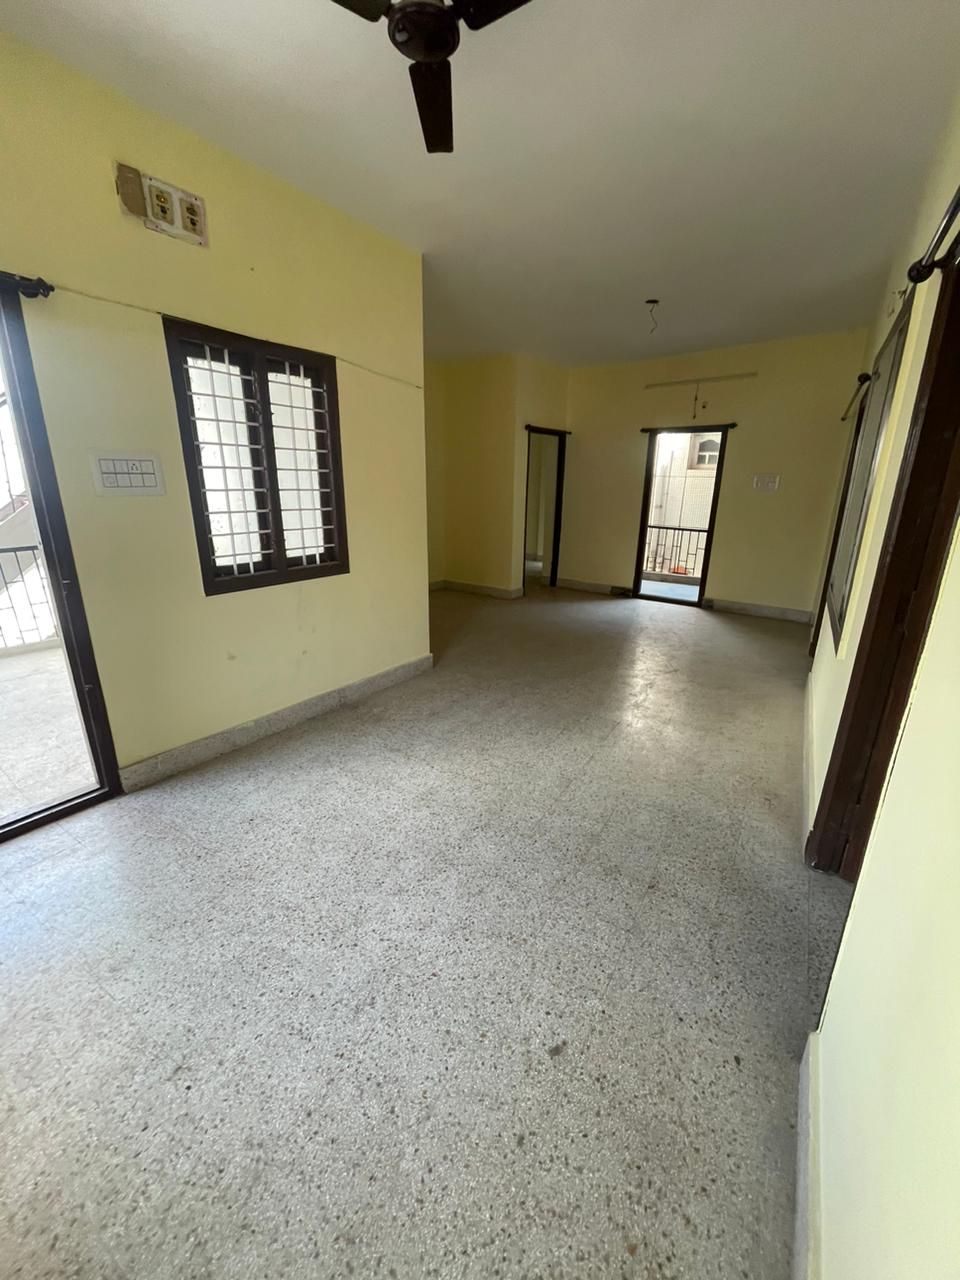 3 BHK Independent House for Lease Only at JAML2 - 2365 in Tasker Town